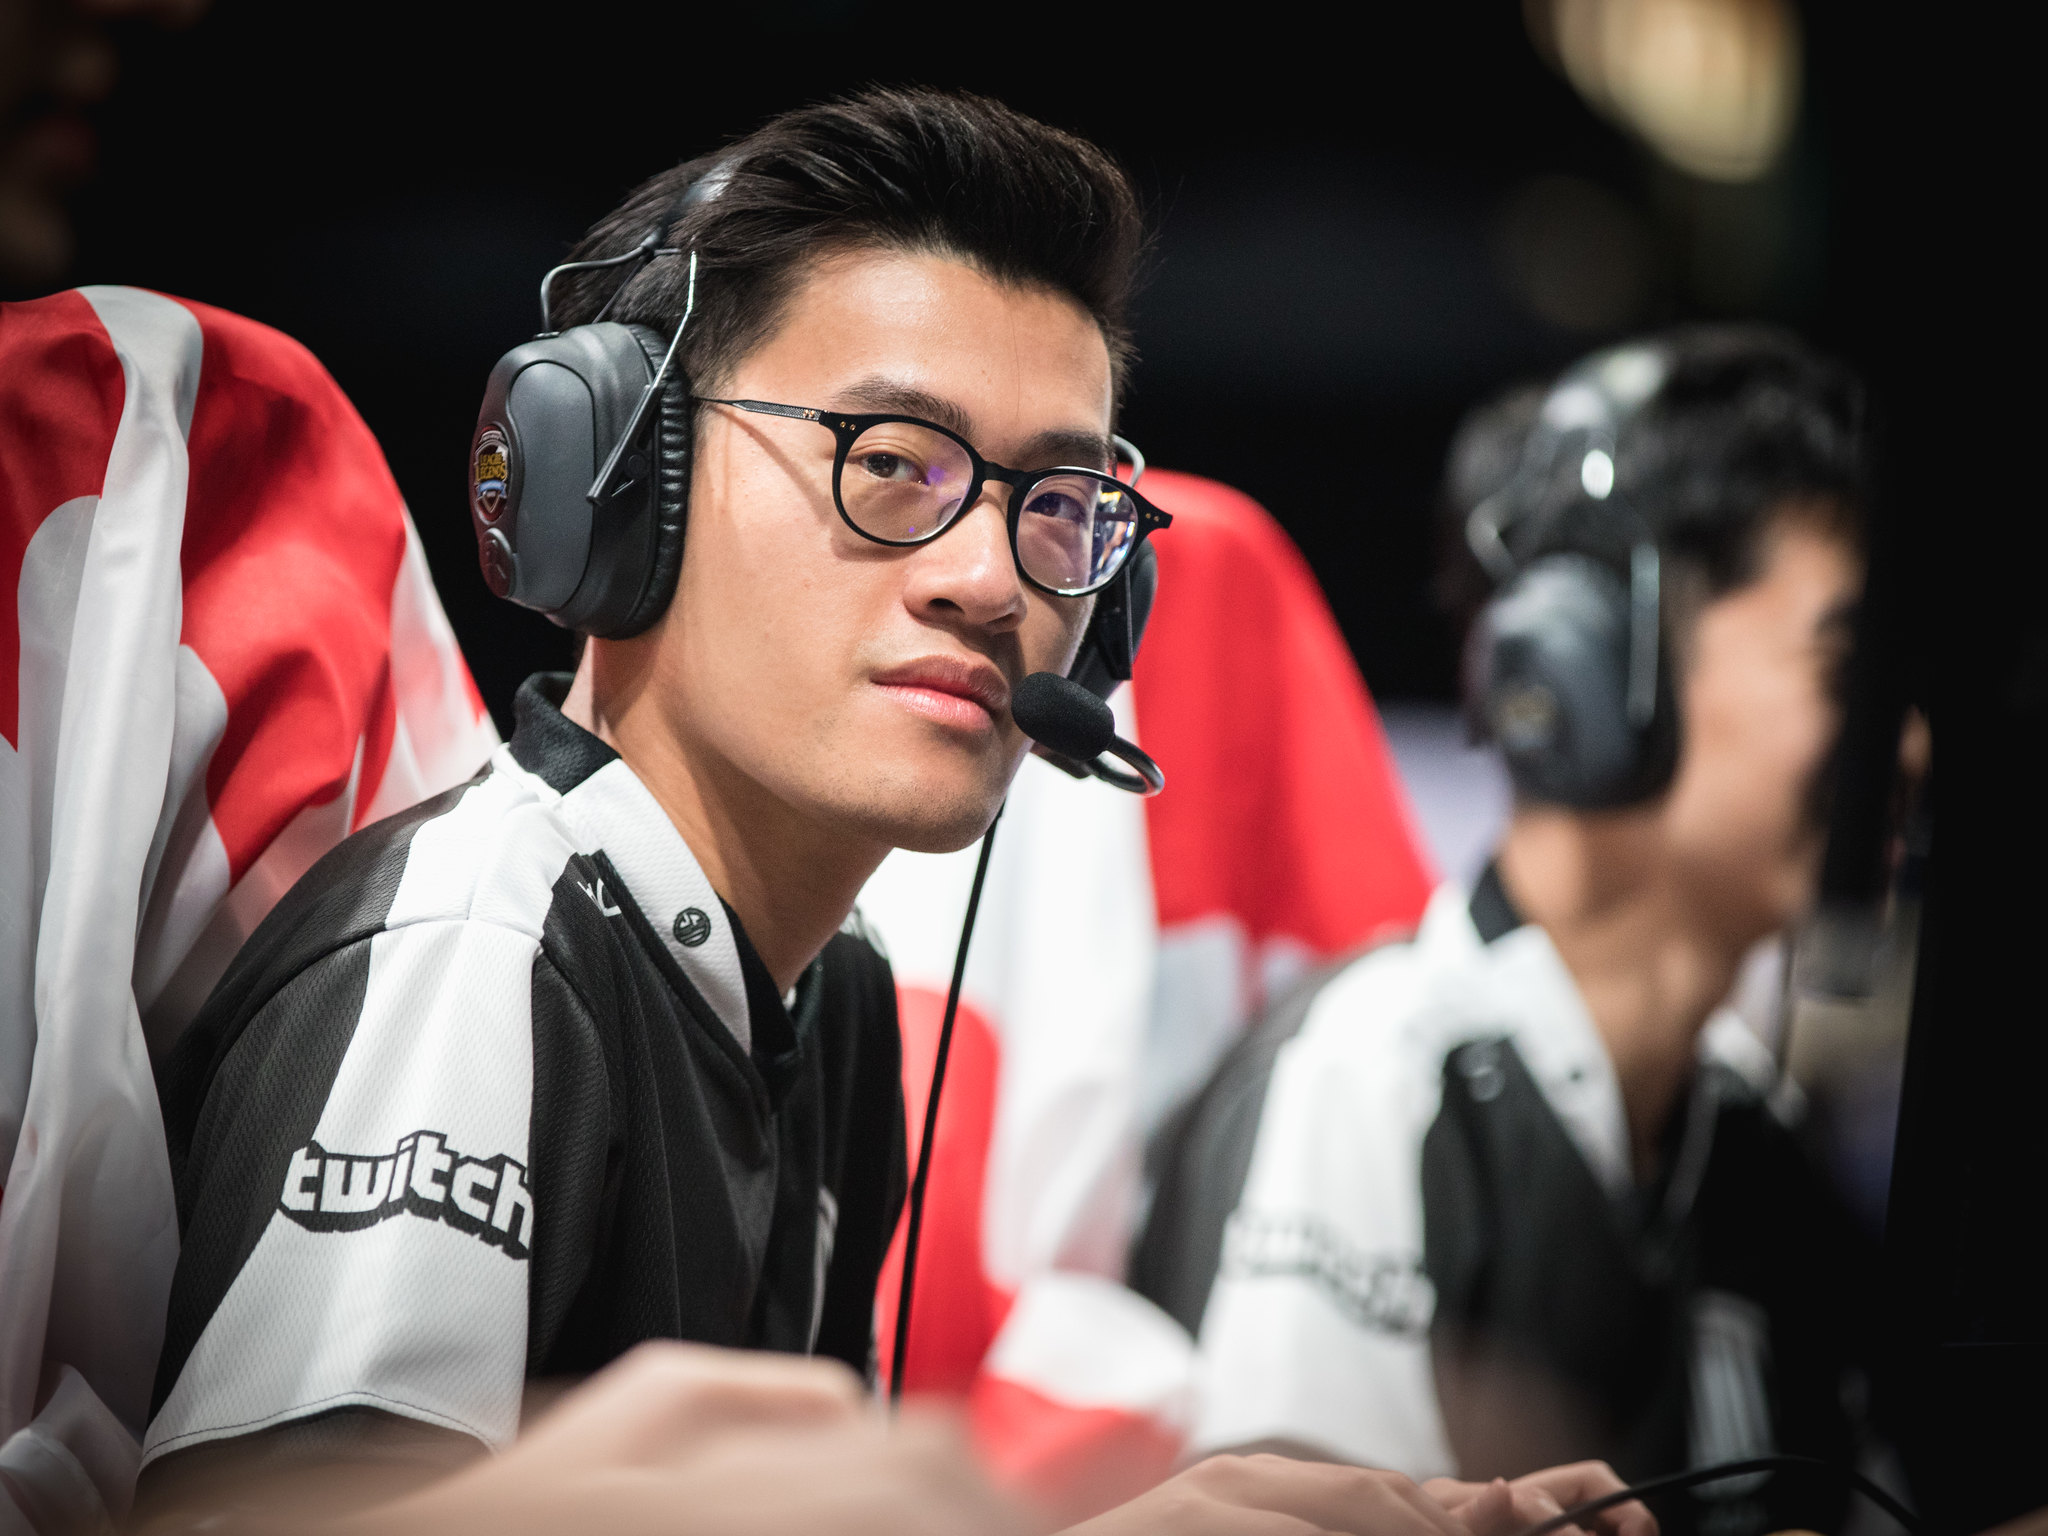 Ruby confirmed as their mid today… #leagueoflegends #lcs #TSM